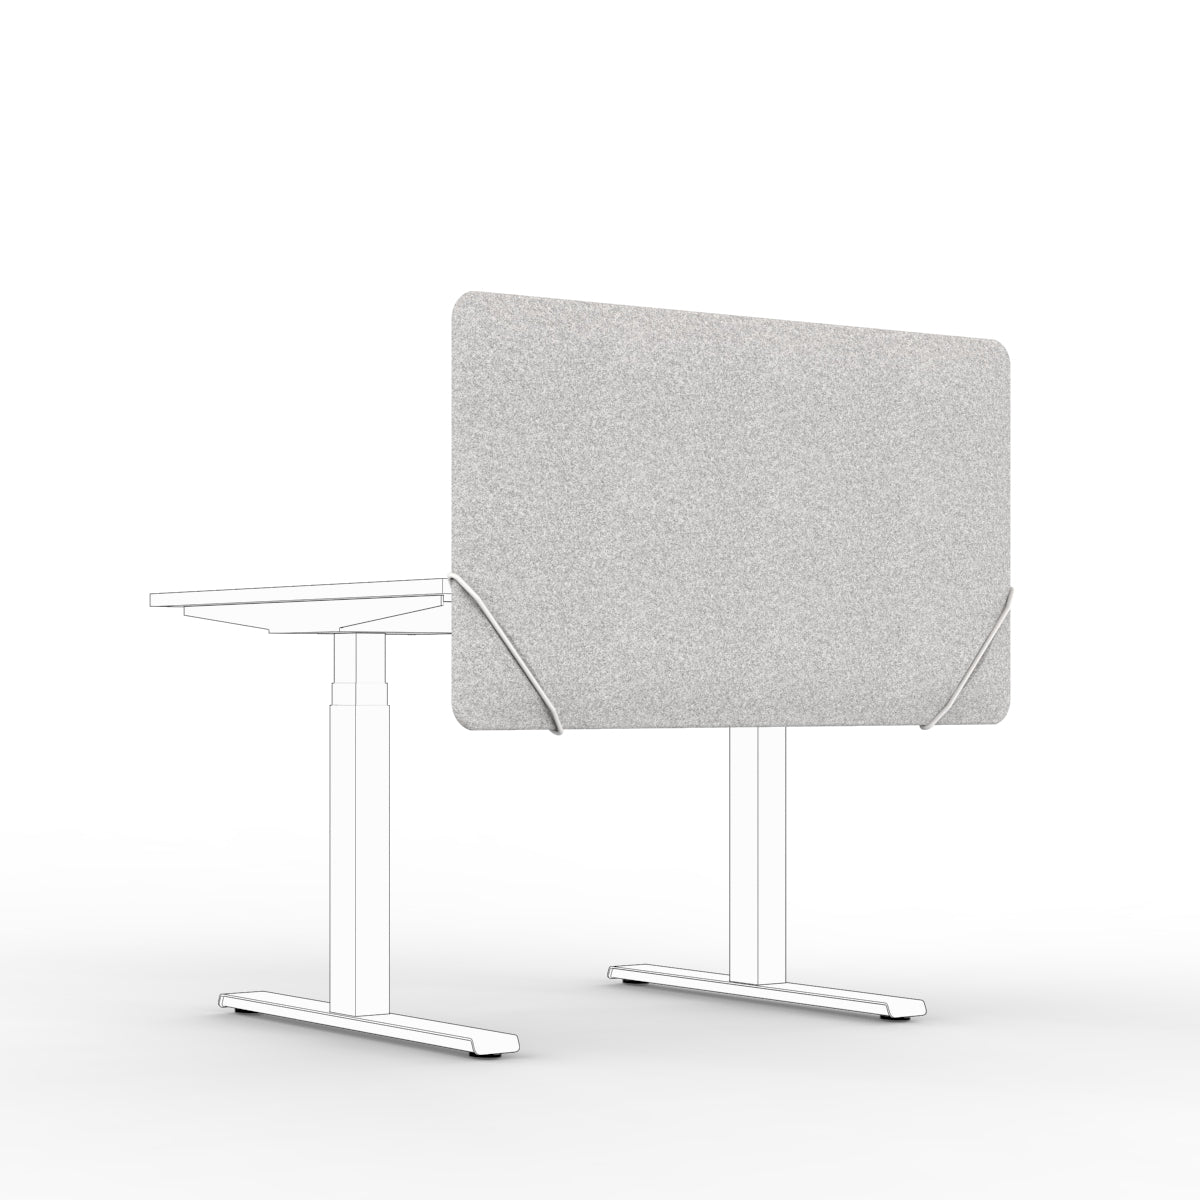 Table screen sound absorber in light grey wool felt with white silde on table brackets. 